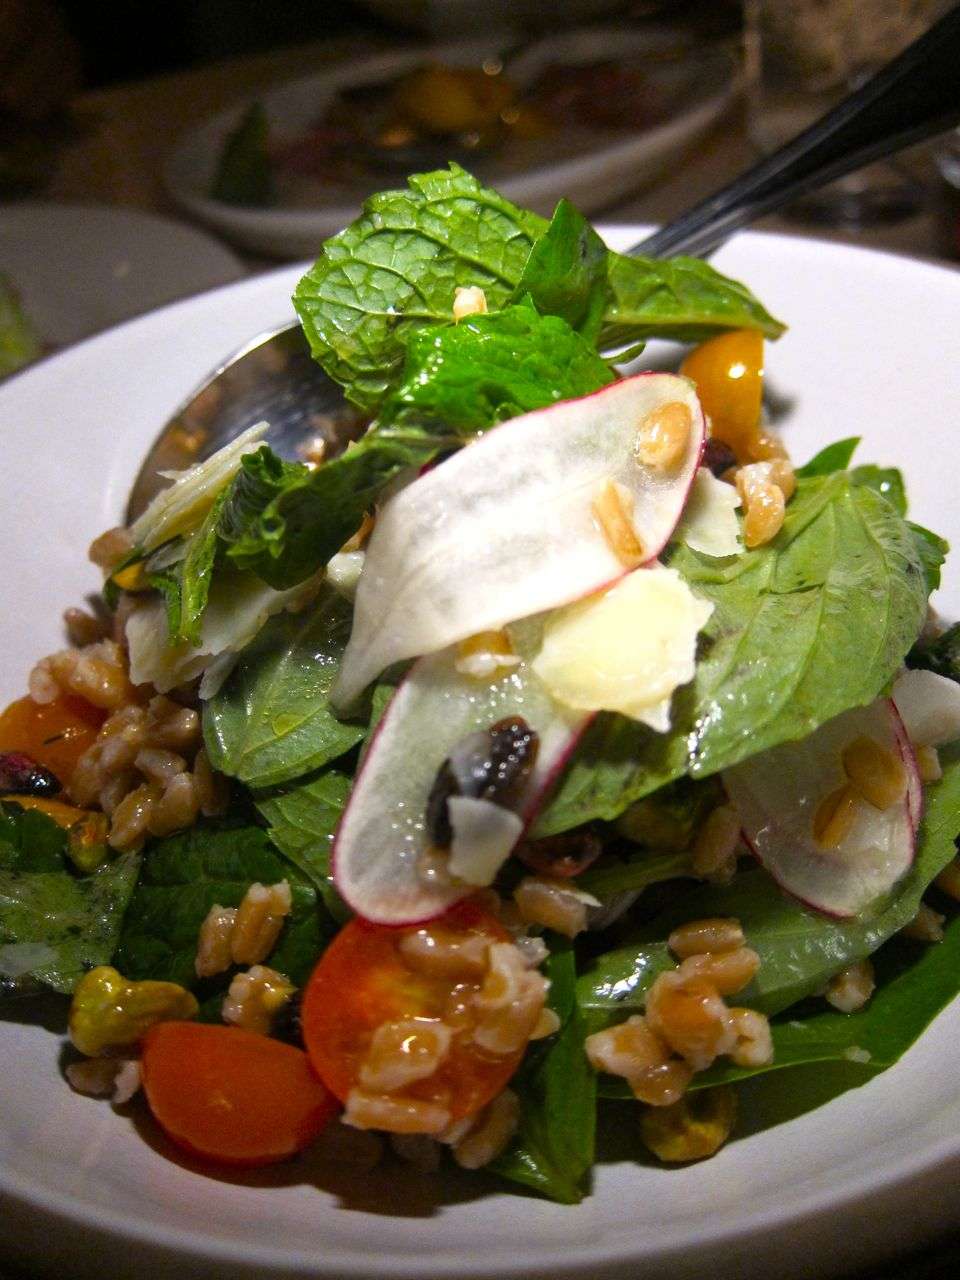 We could make a dinner of small plates, starting with this marvelous farro salad.